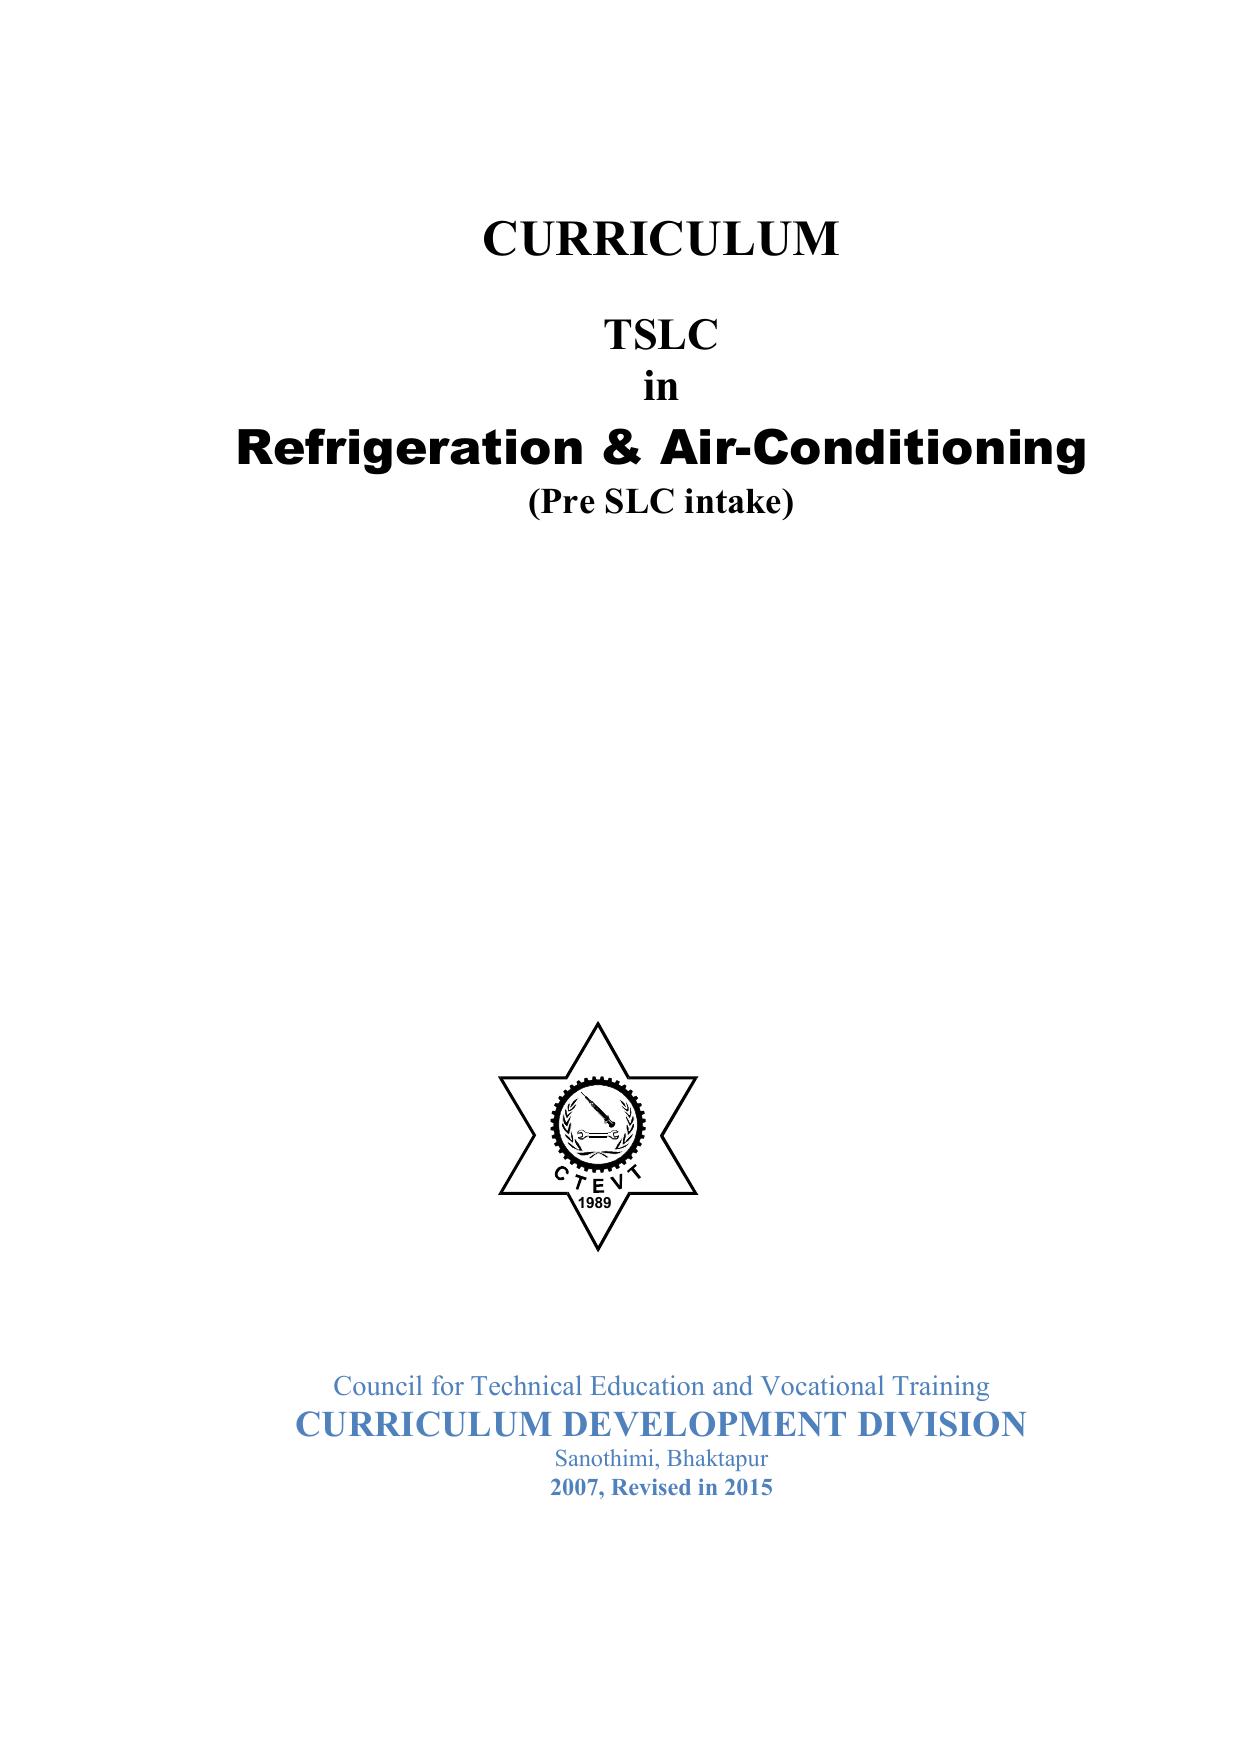 TSLC in Refrigeration and Air-Conditioning, 2016